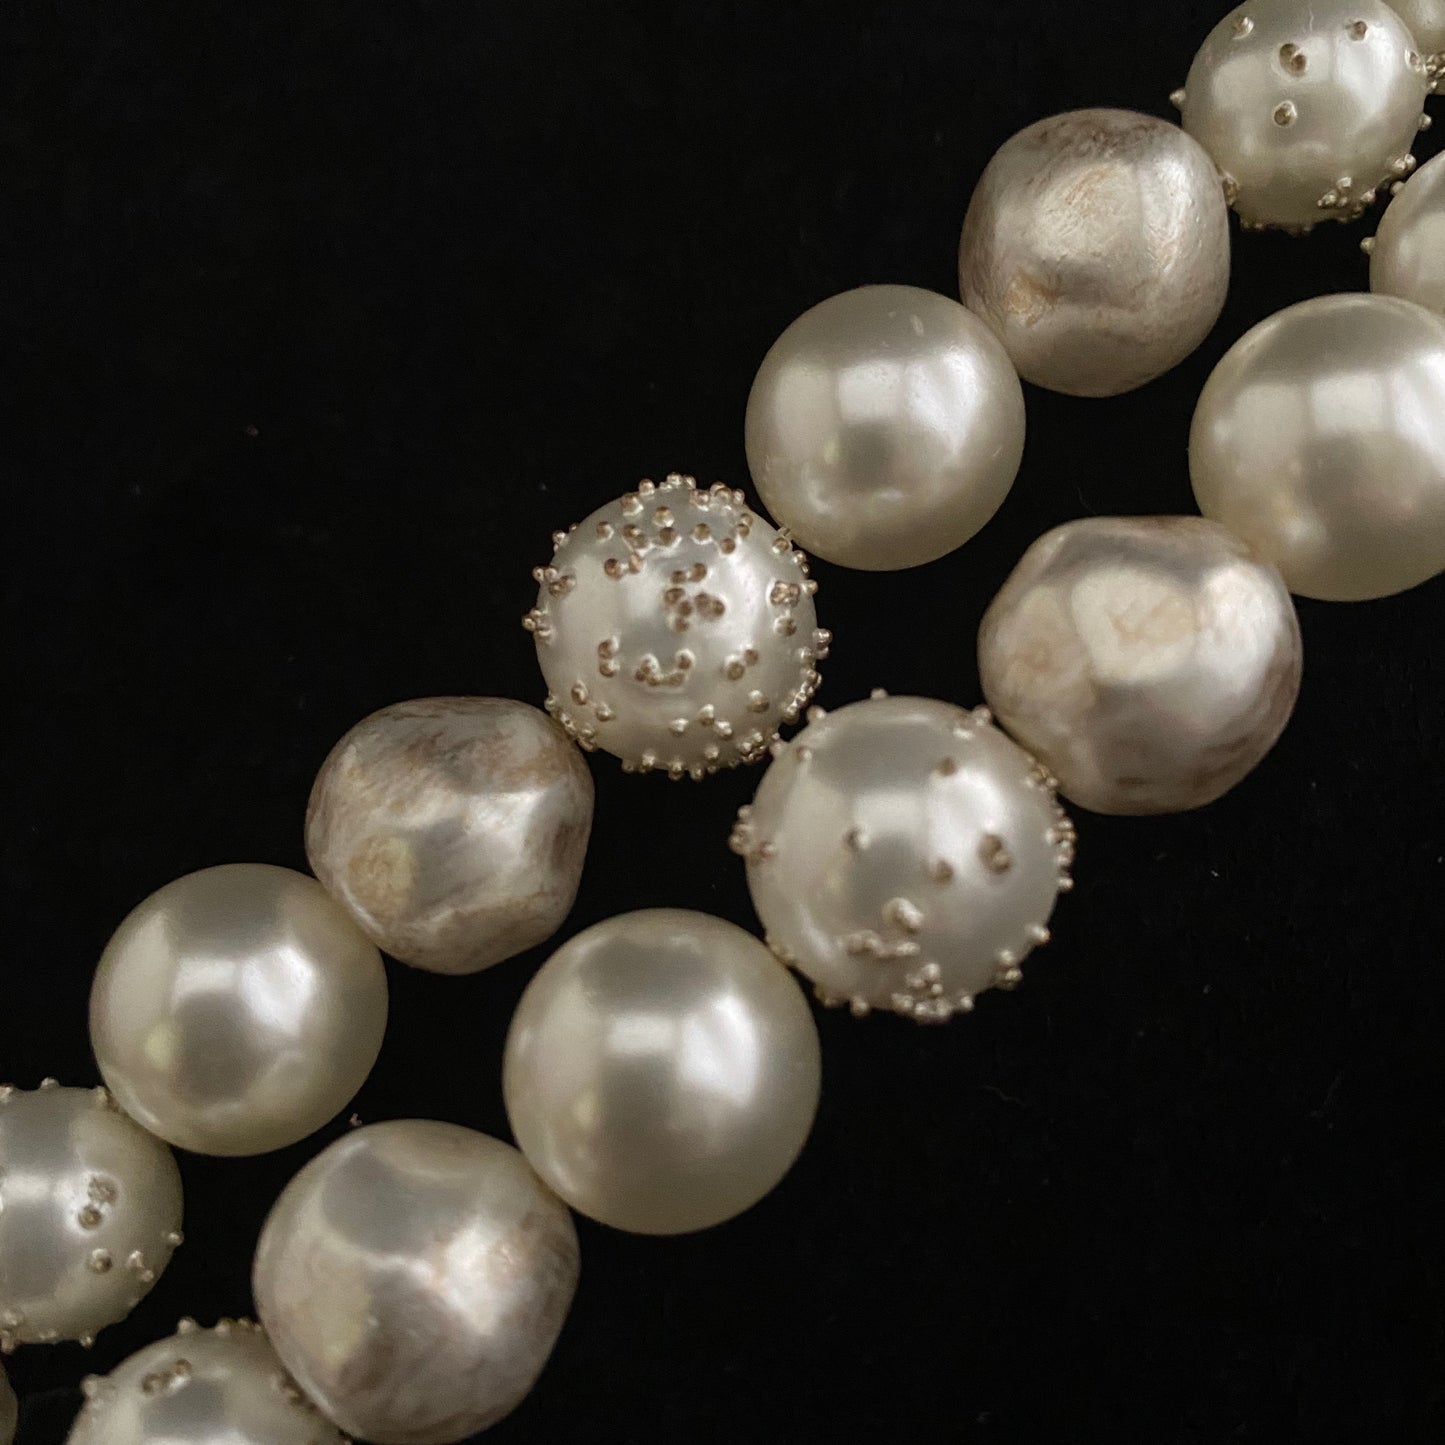 Late 50s/ Early 60s Marvella Faux Pearl Demi-Parure